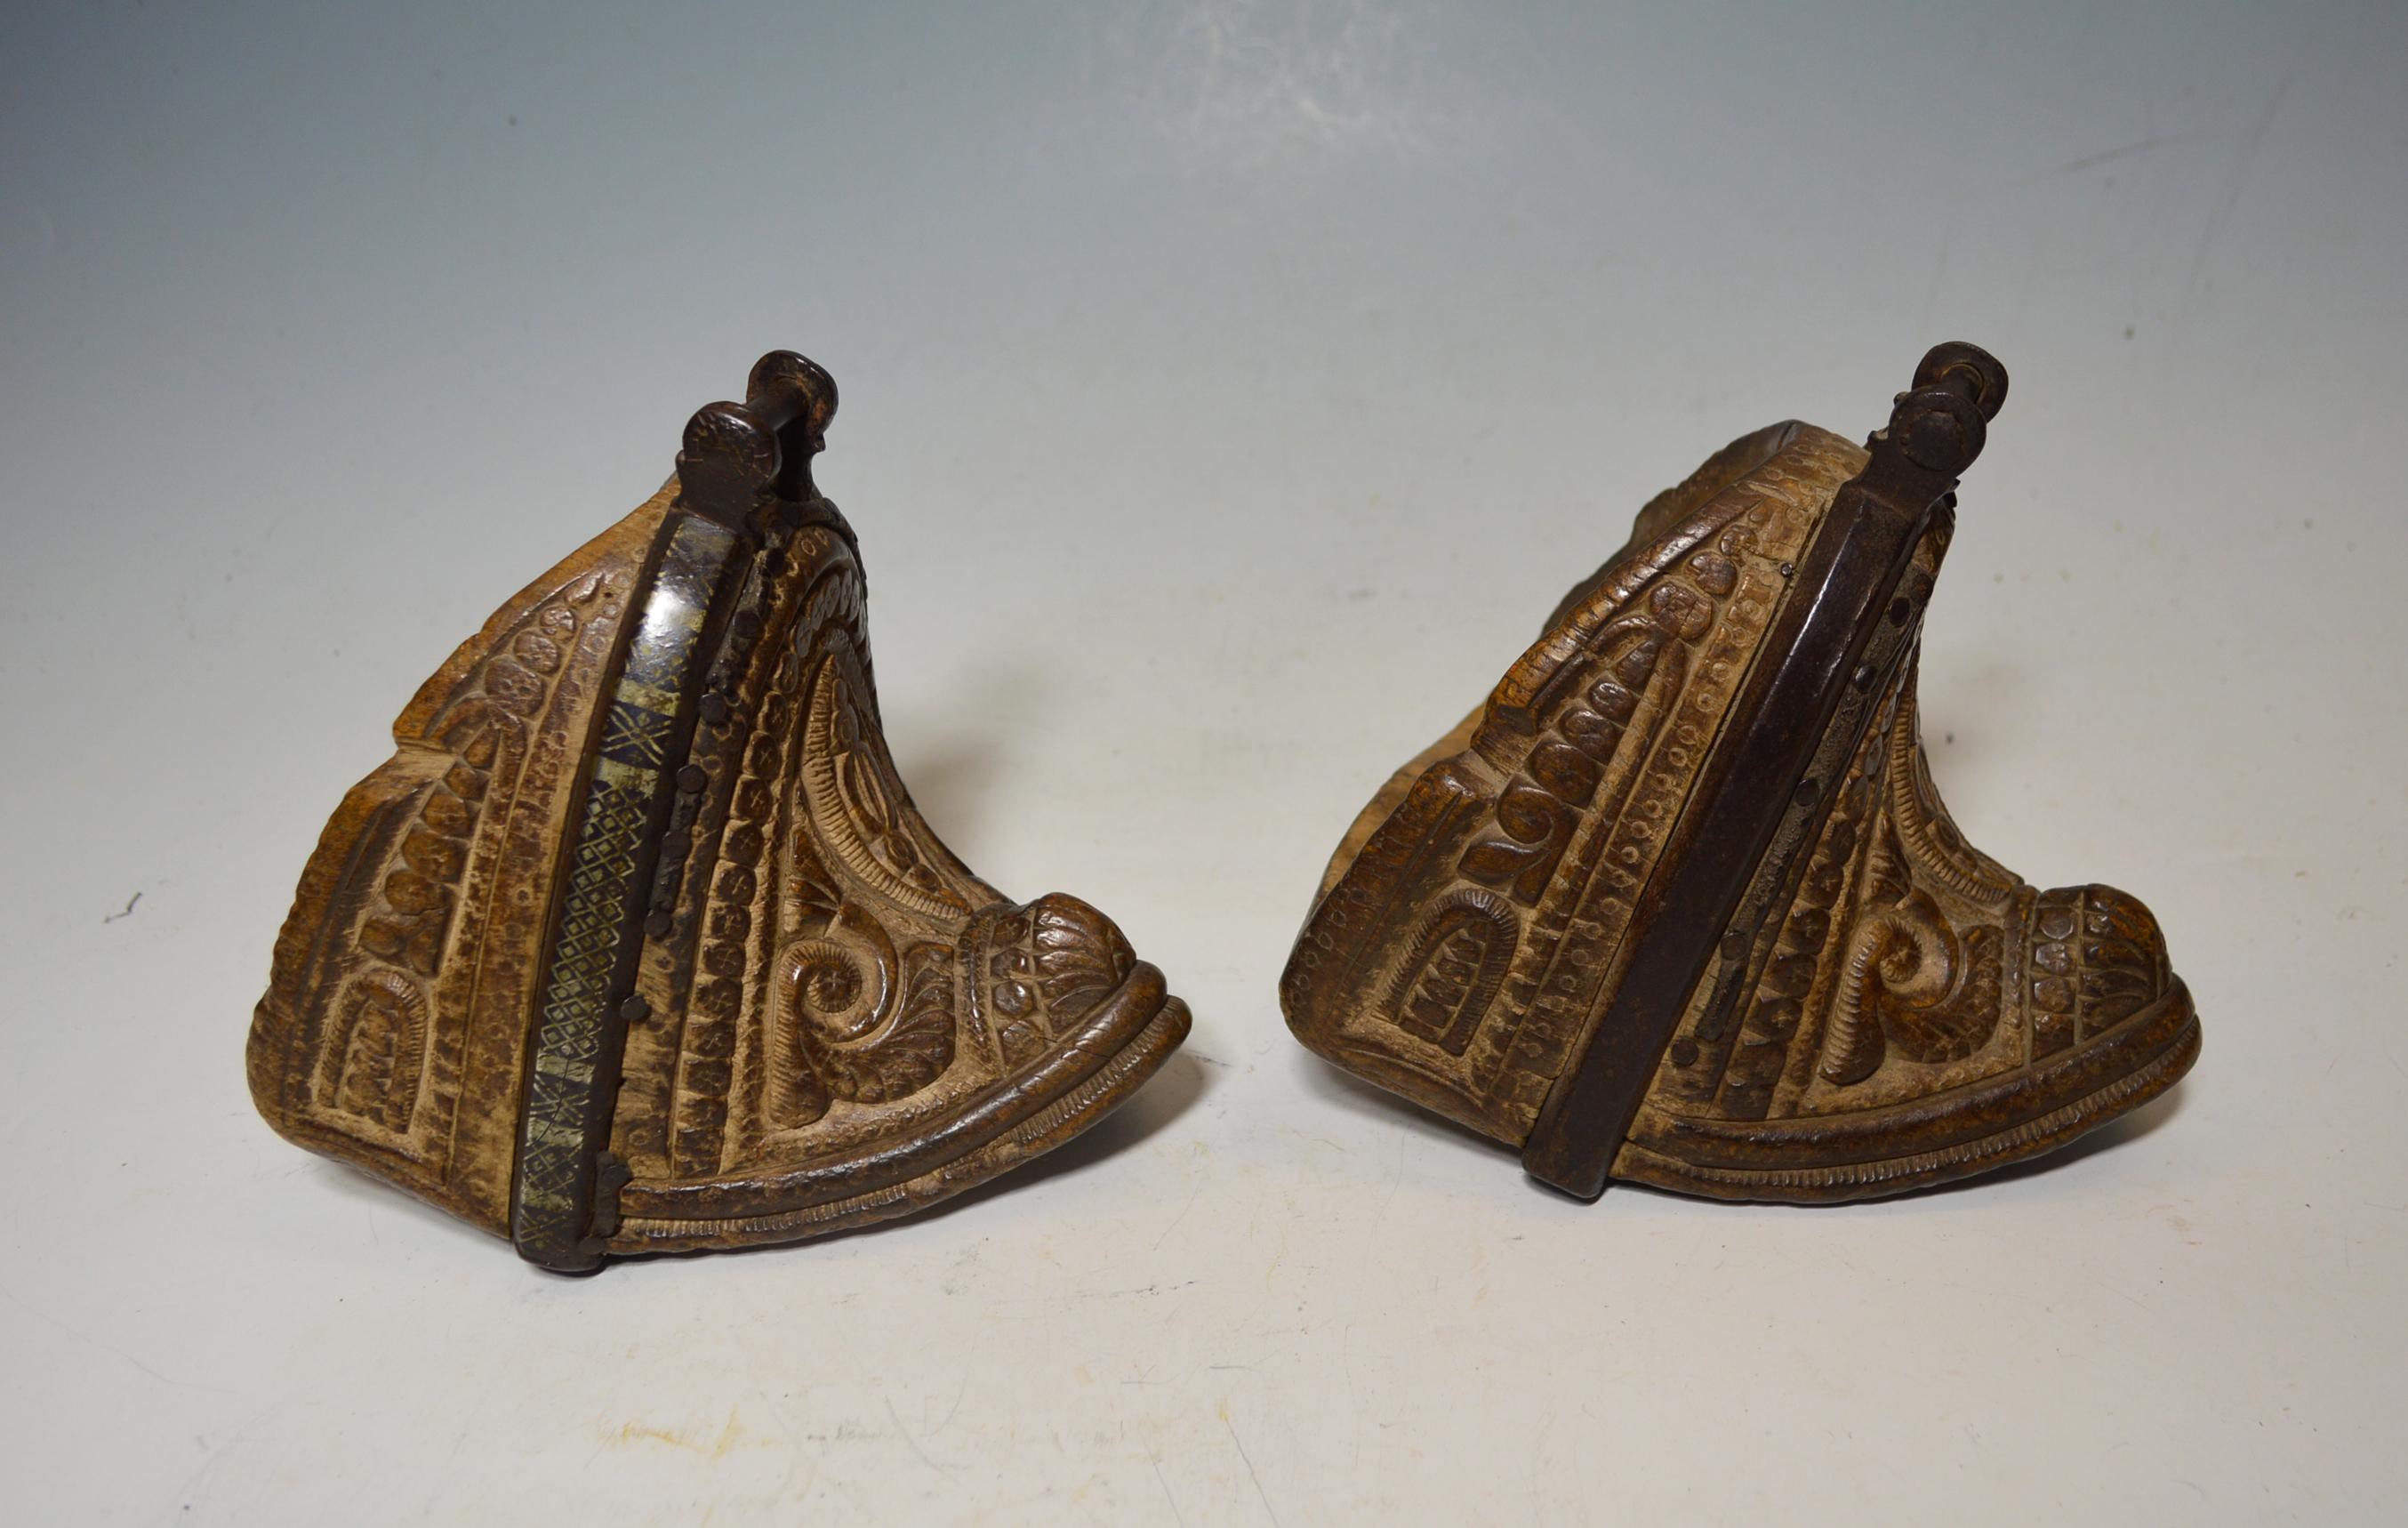 Fine pair of antique Latin American carved wood gaucho equestrian stirrups

A particularly fine old pair of fine carved wood and metal stirrups from the Gaucho of Argentina 

Good pieces for interior design elements or home decoration

Period: